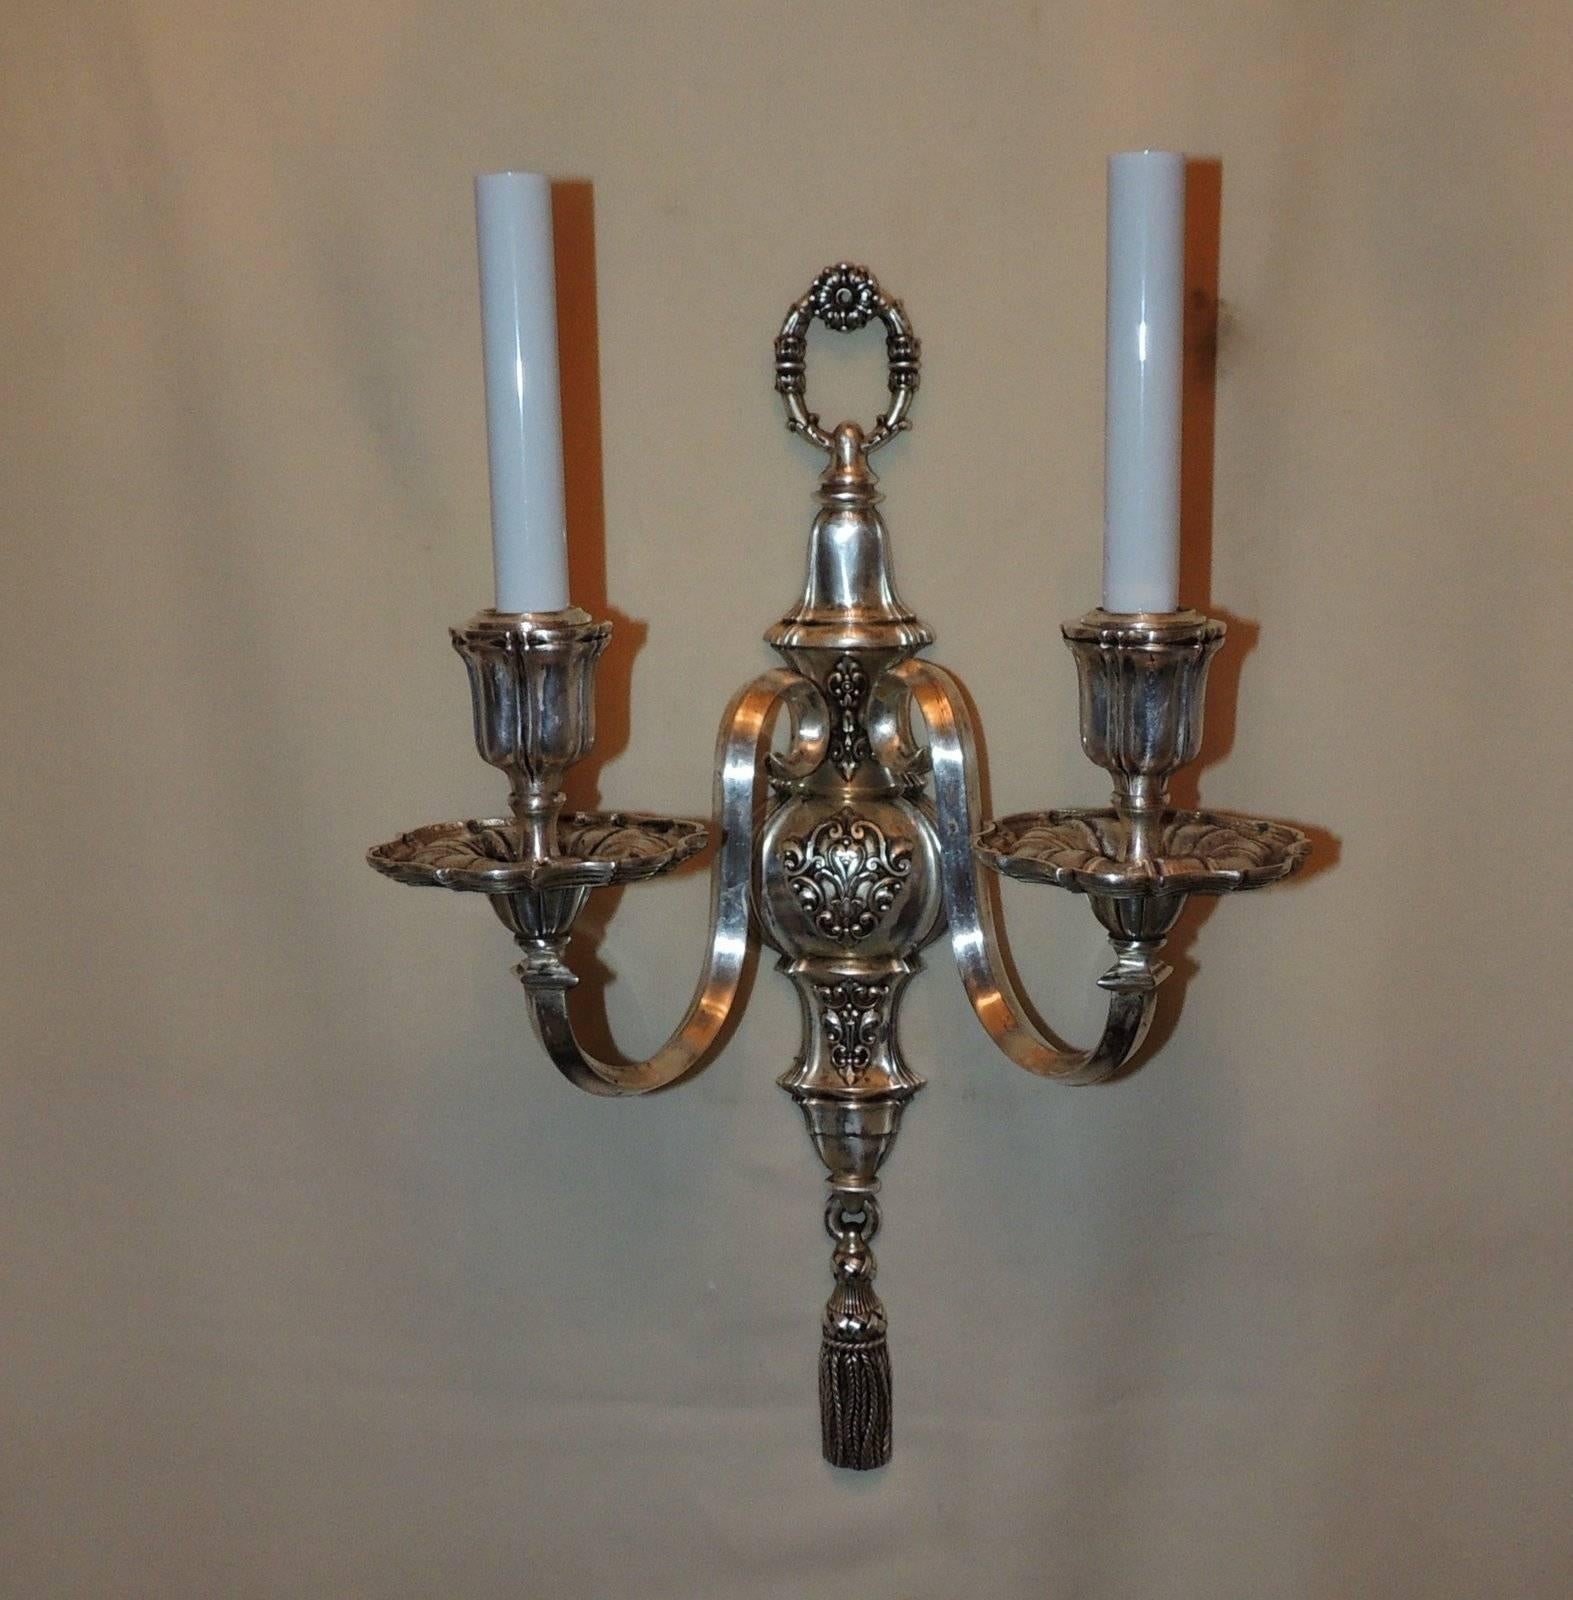 A handsome pair of stamped E.F. Caldwell silvered bronze, nickel-plated tassel Regency two pair of sconces with two arms, beautiful details on candle cups and bobe`ches,
completely redone with new wires and sockets, come ready to install.

Measures: